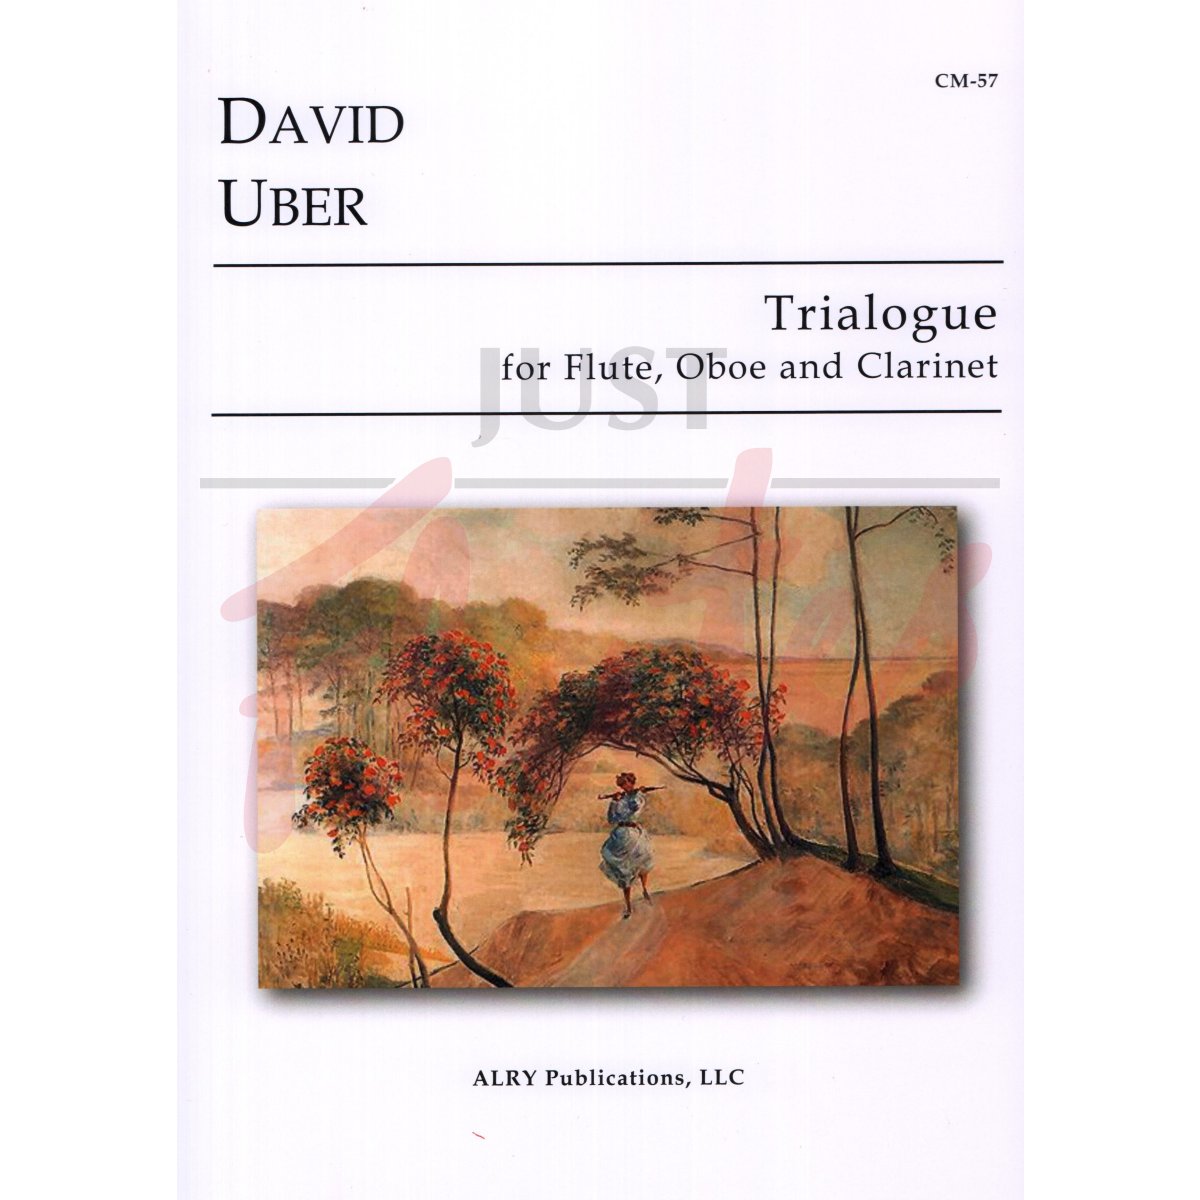 Trialogue for Flute, Oboe and Clarinet